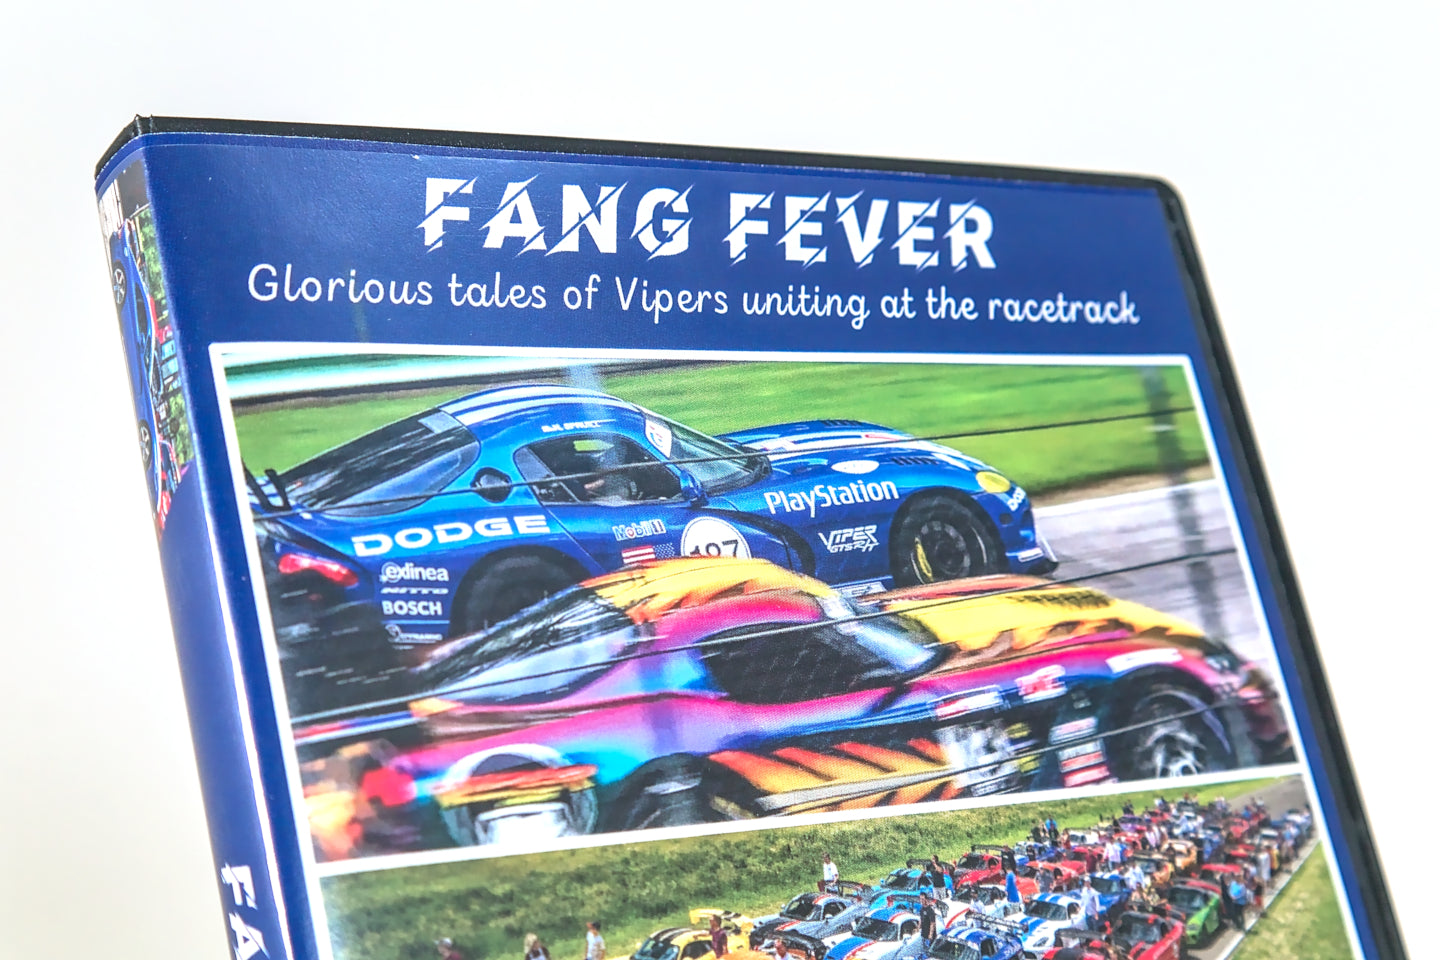 Fang Fever – Blu-Ray Collection